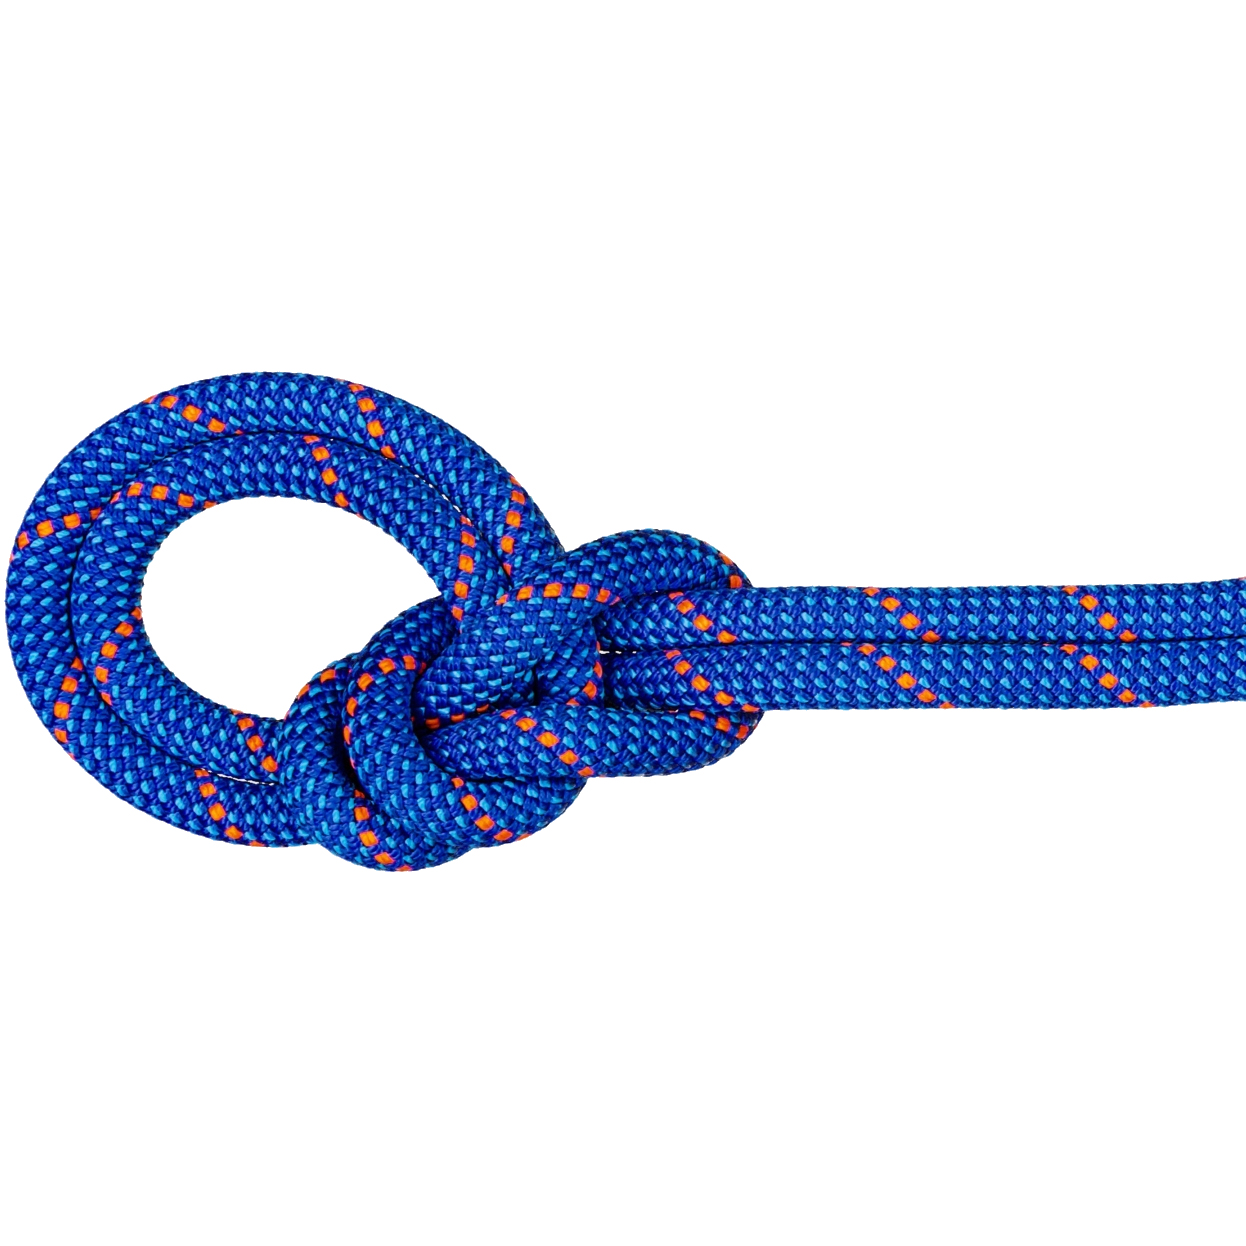 Picture of Mammut 9.5 Crag Dry Rope - 80m - blue-ocean